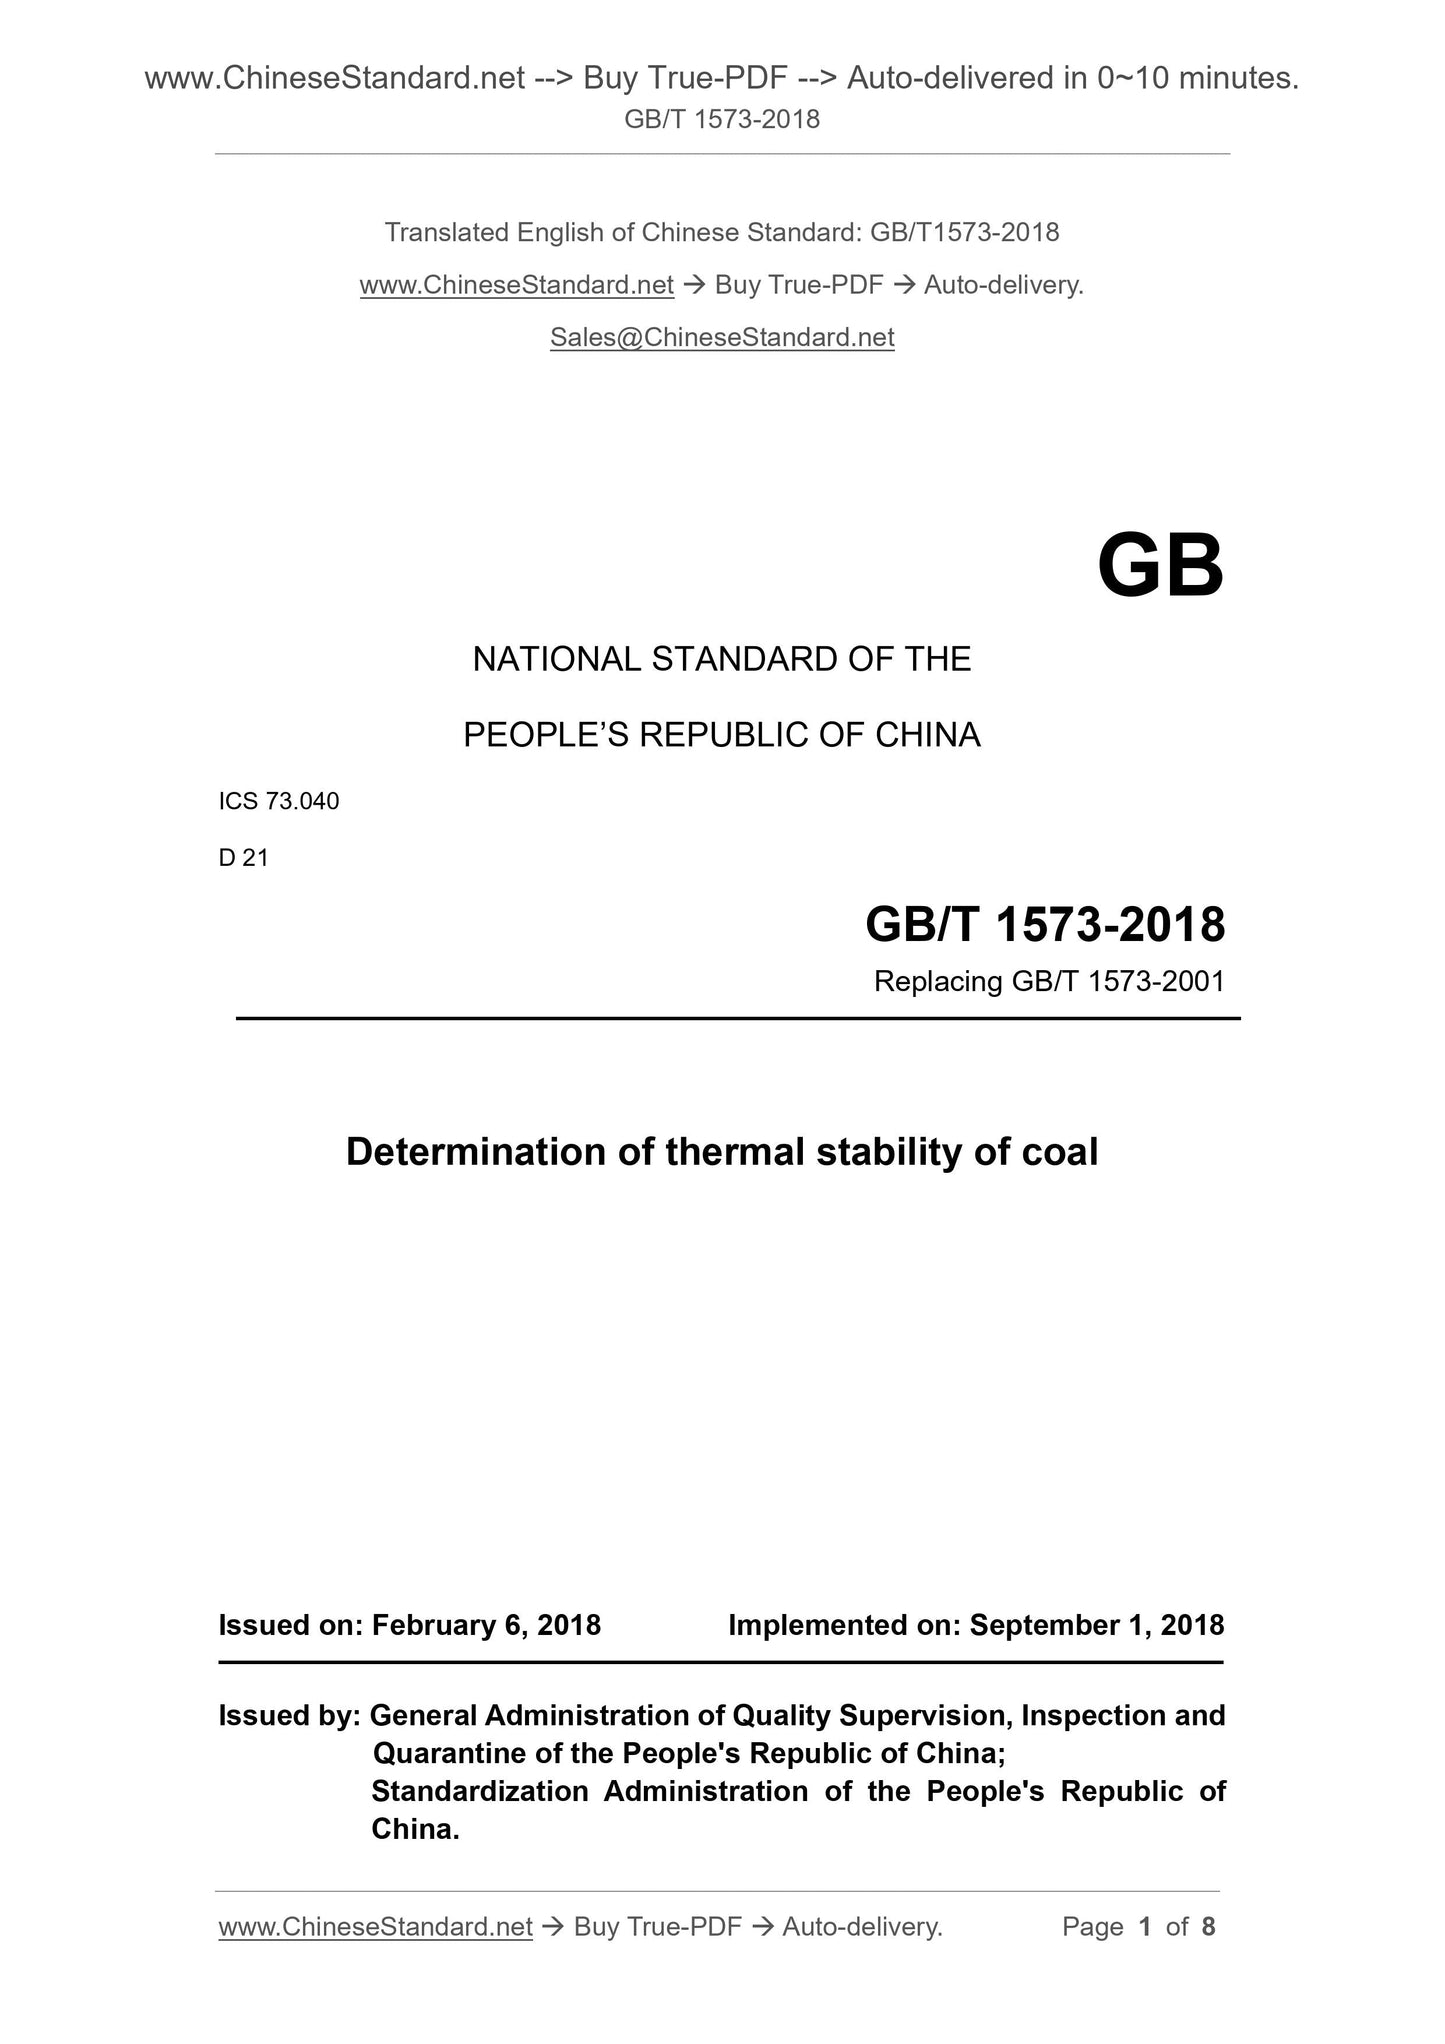 GB/T 1573-2018 Page 1